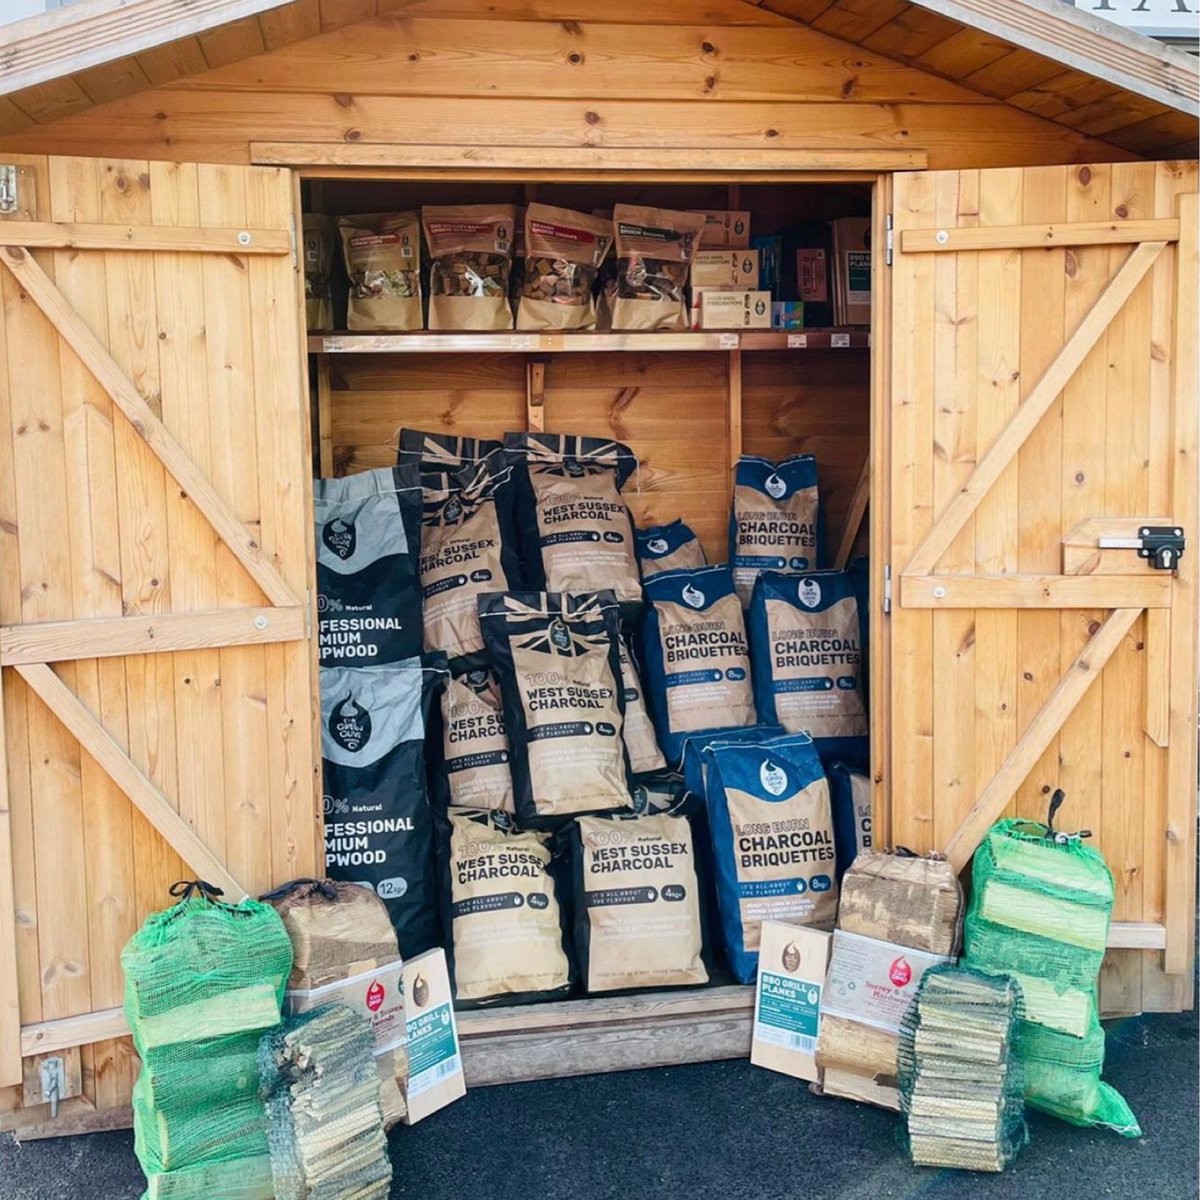 Did you know we stock Charcoal, Briquettes, Smokin Chunks & Chips! We have a wide selection available for all your BBQ needs!! Locally sourced from Green Olive #BBQ #Burgers #Sausages #Charcoal #BBQTime #ShopLocal #Tonbridge #Haywards1990